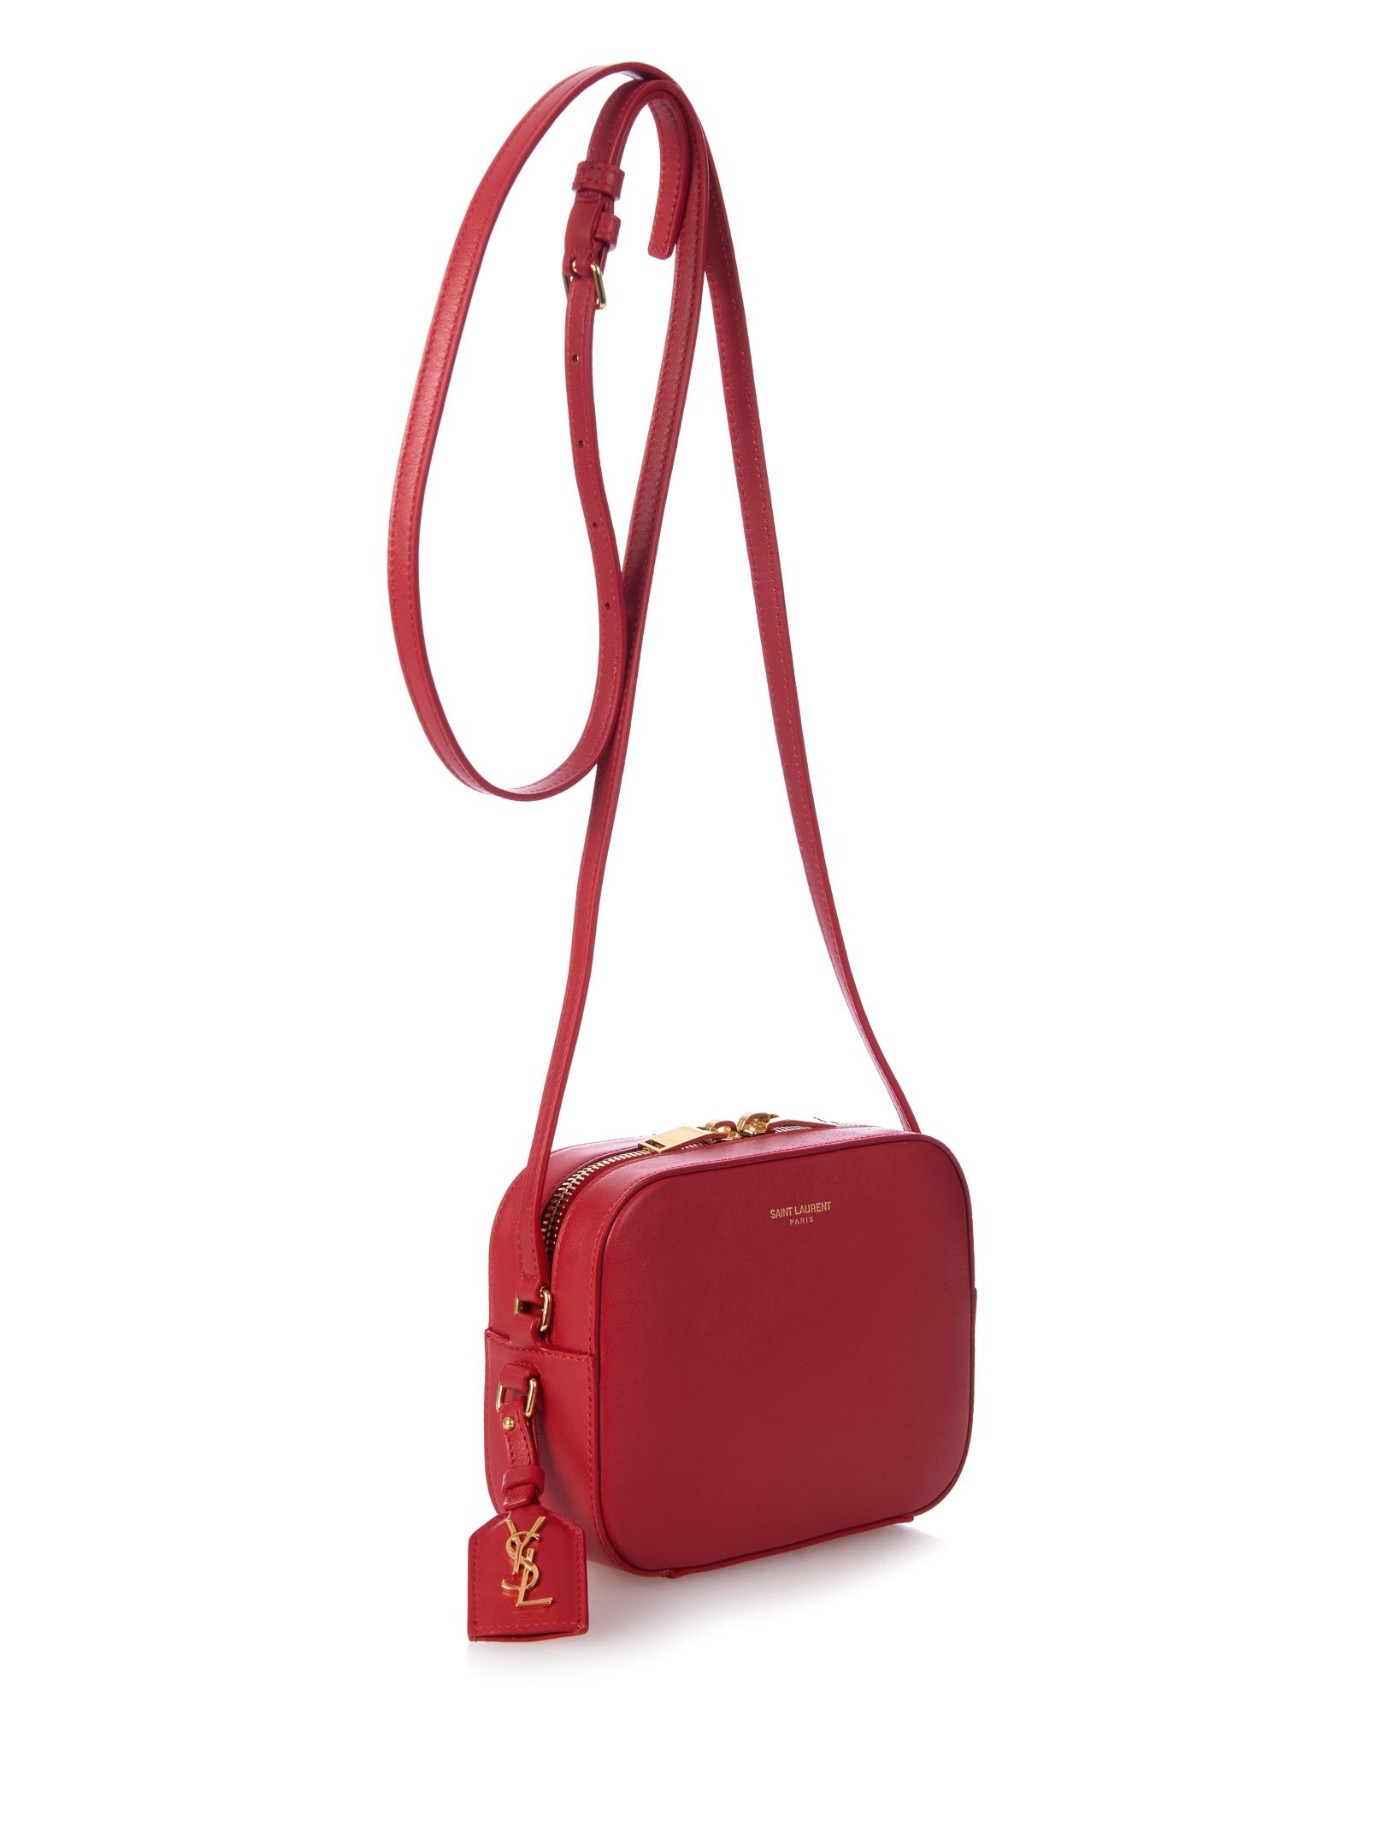 Saint laurent Monogram Small Leather Cross-body Bag in Red | Lyst